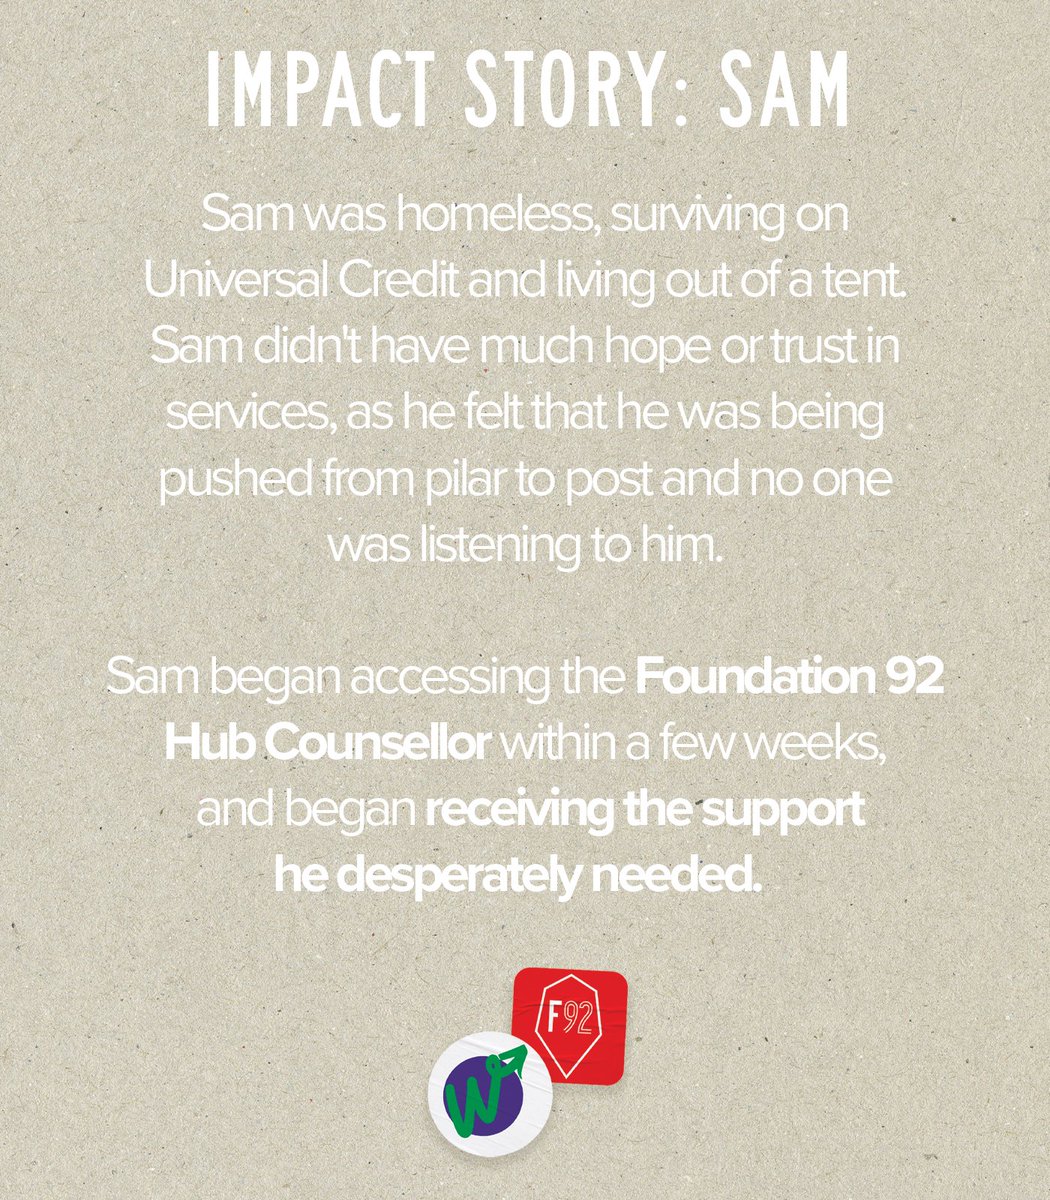 Our Well-being Hub in Stockport continues to help vulnerable adults get back on track. Read more about Sam's story over on our website 👇 🔗: foundation92.co.uk/news/impact-st…